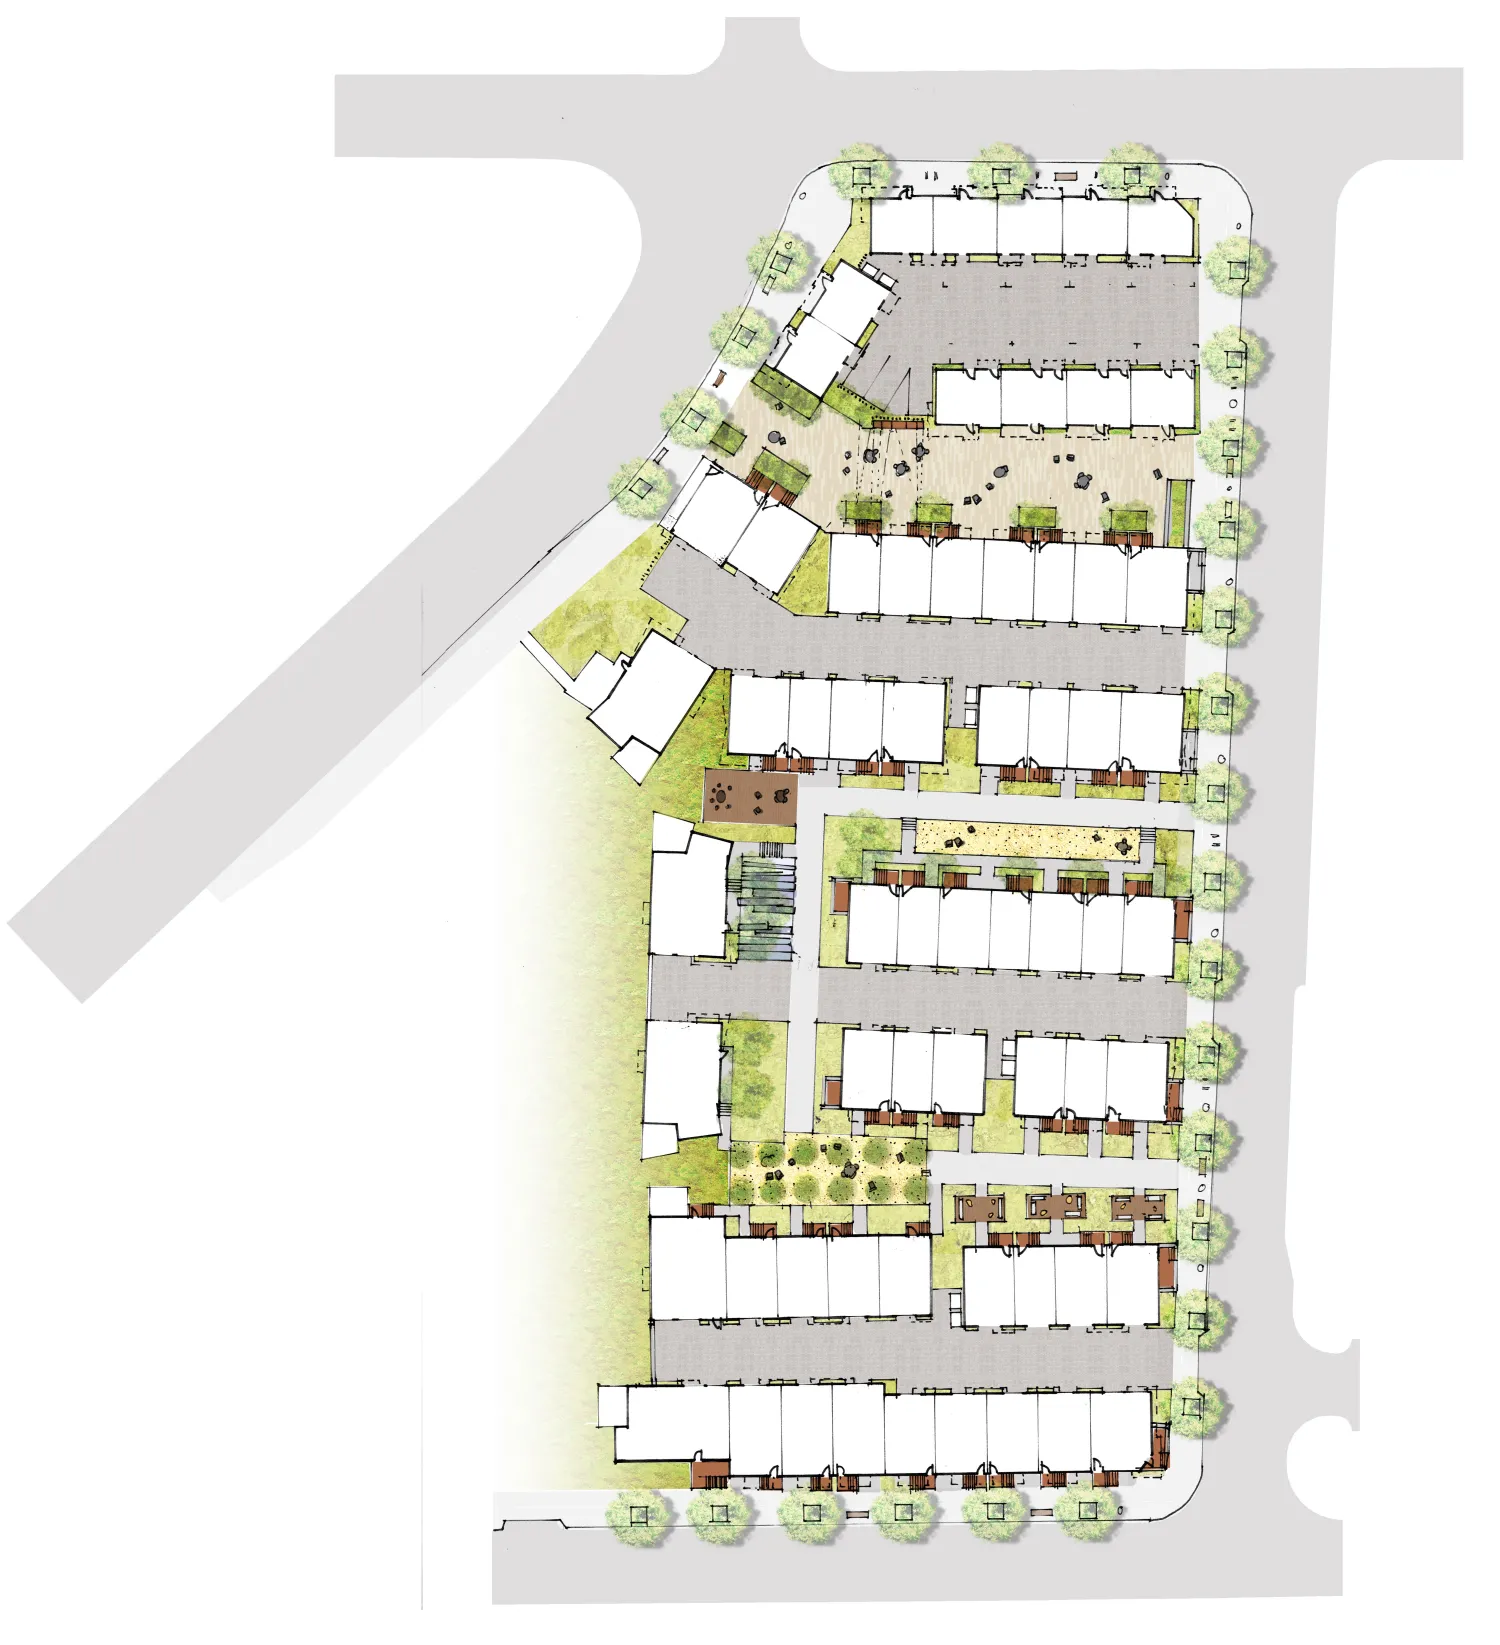 Site plan for The Grove in Durham, North Carolina.